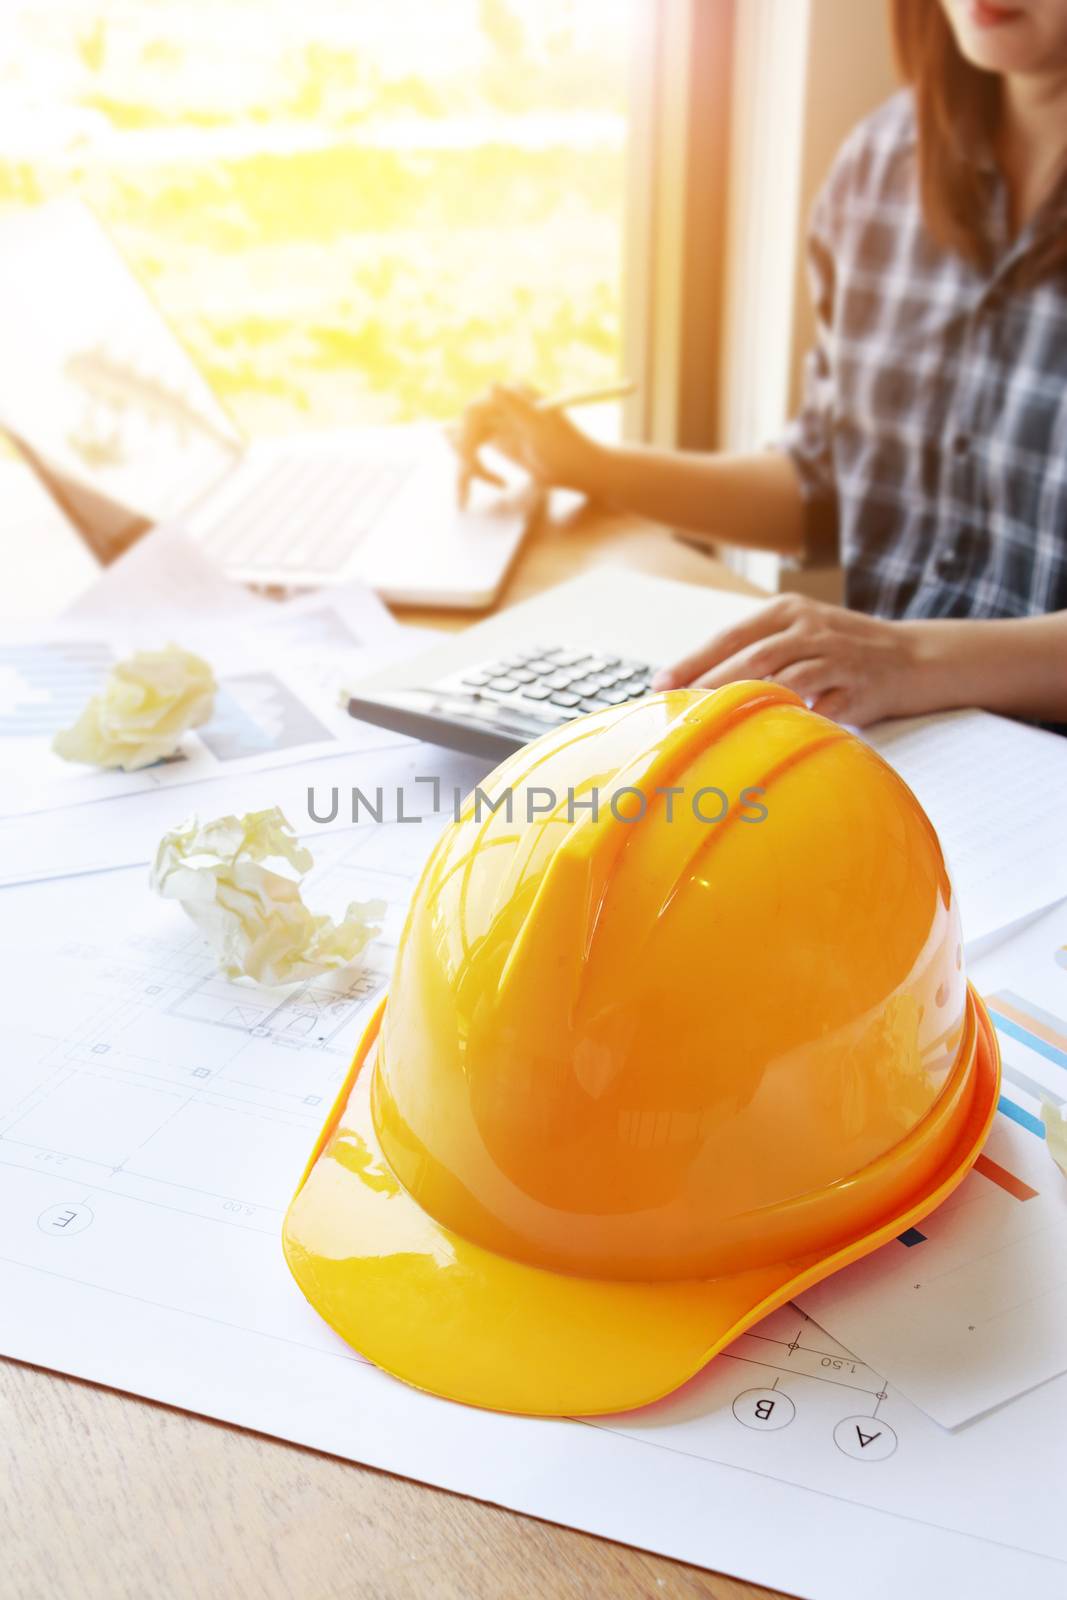 architect Asian woman working with laptop, calculator and blueprints. engineer calculate and inspection in workplace for blueprints architectural plan,sketching a construction project ,selective focus